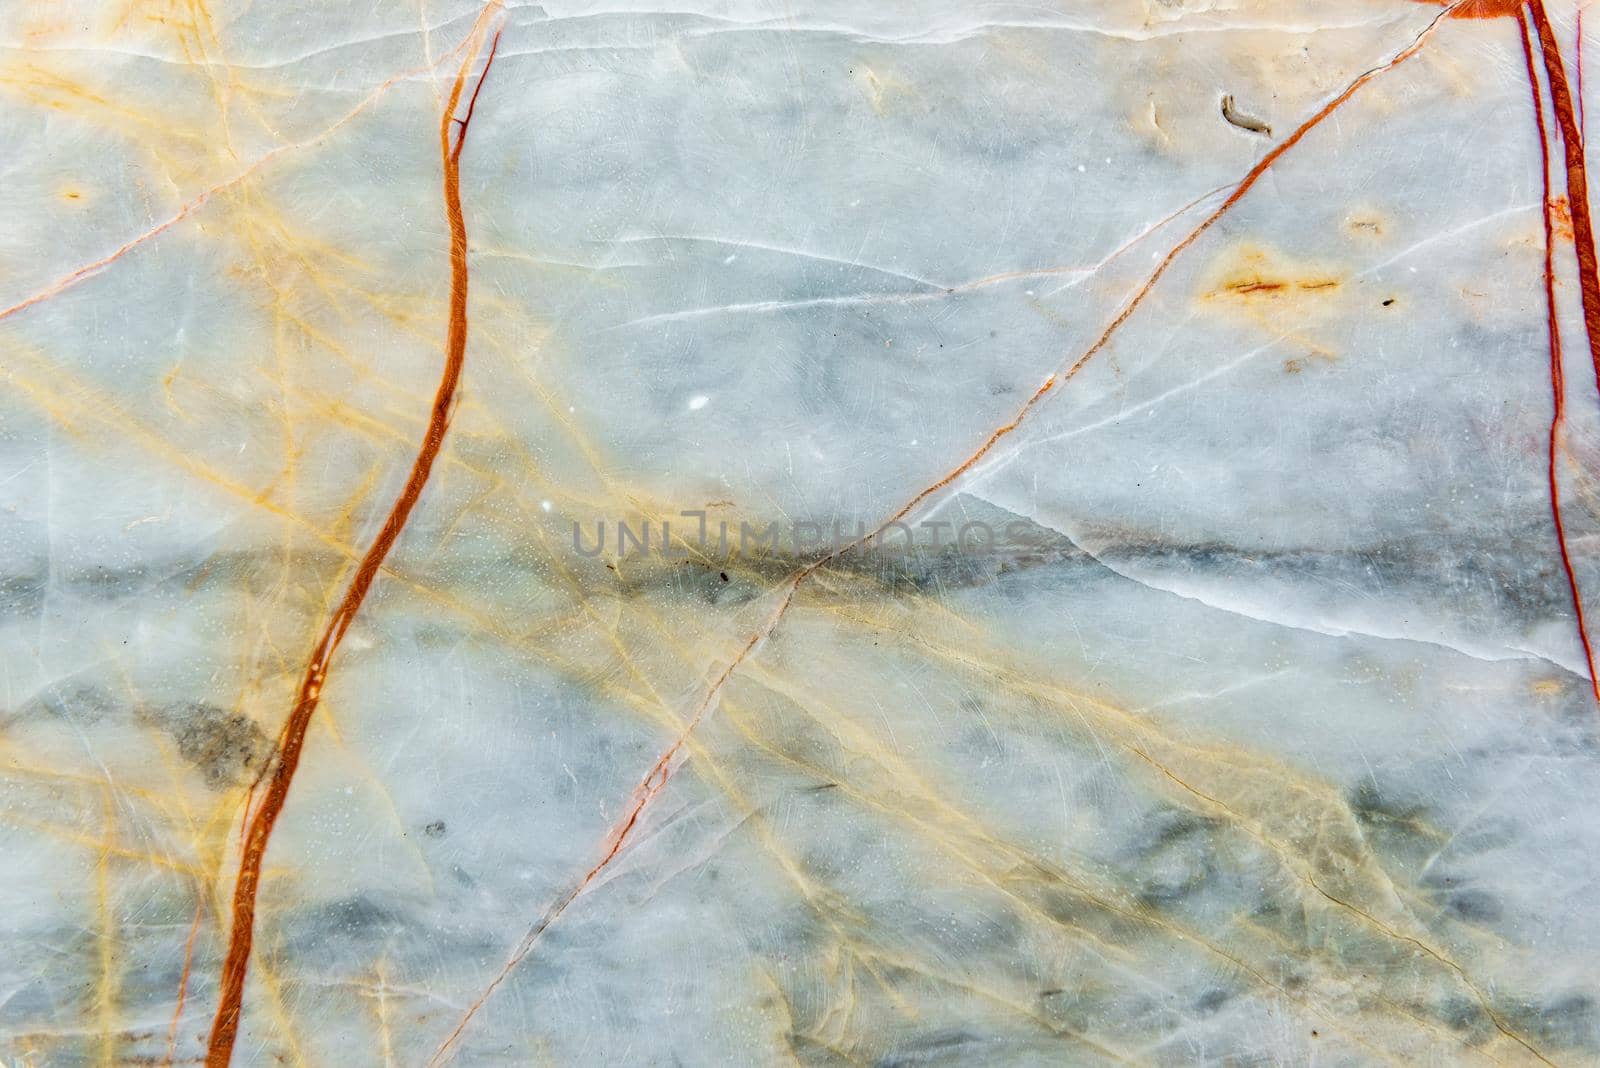 Natural Marble Texture Stone Background, Abstract Granite Pattern of Flooring. Surface Marble Textured Detail of Level Interior Decoration, Home Decorative Design for Architecture Wall and Floor.